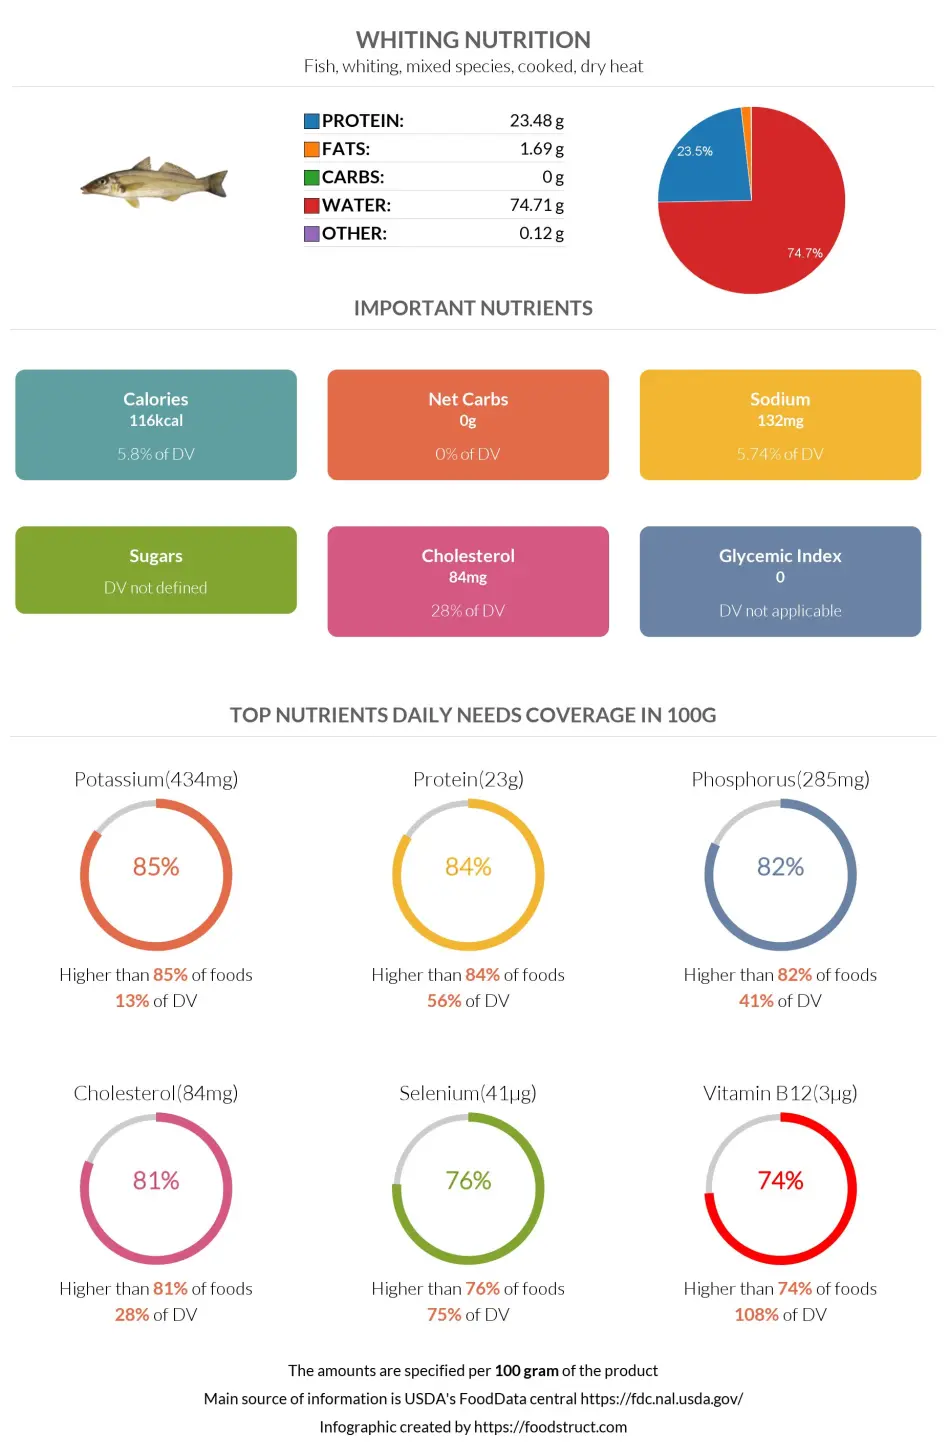 Whiting nutrition infographic